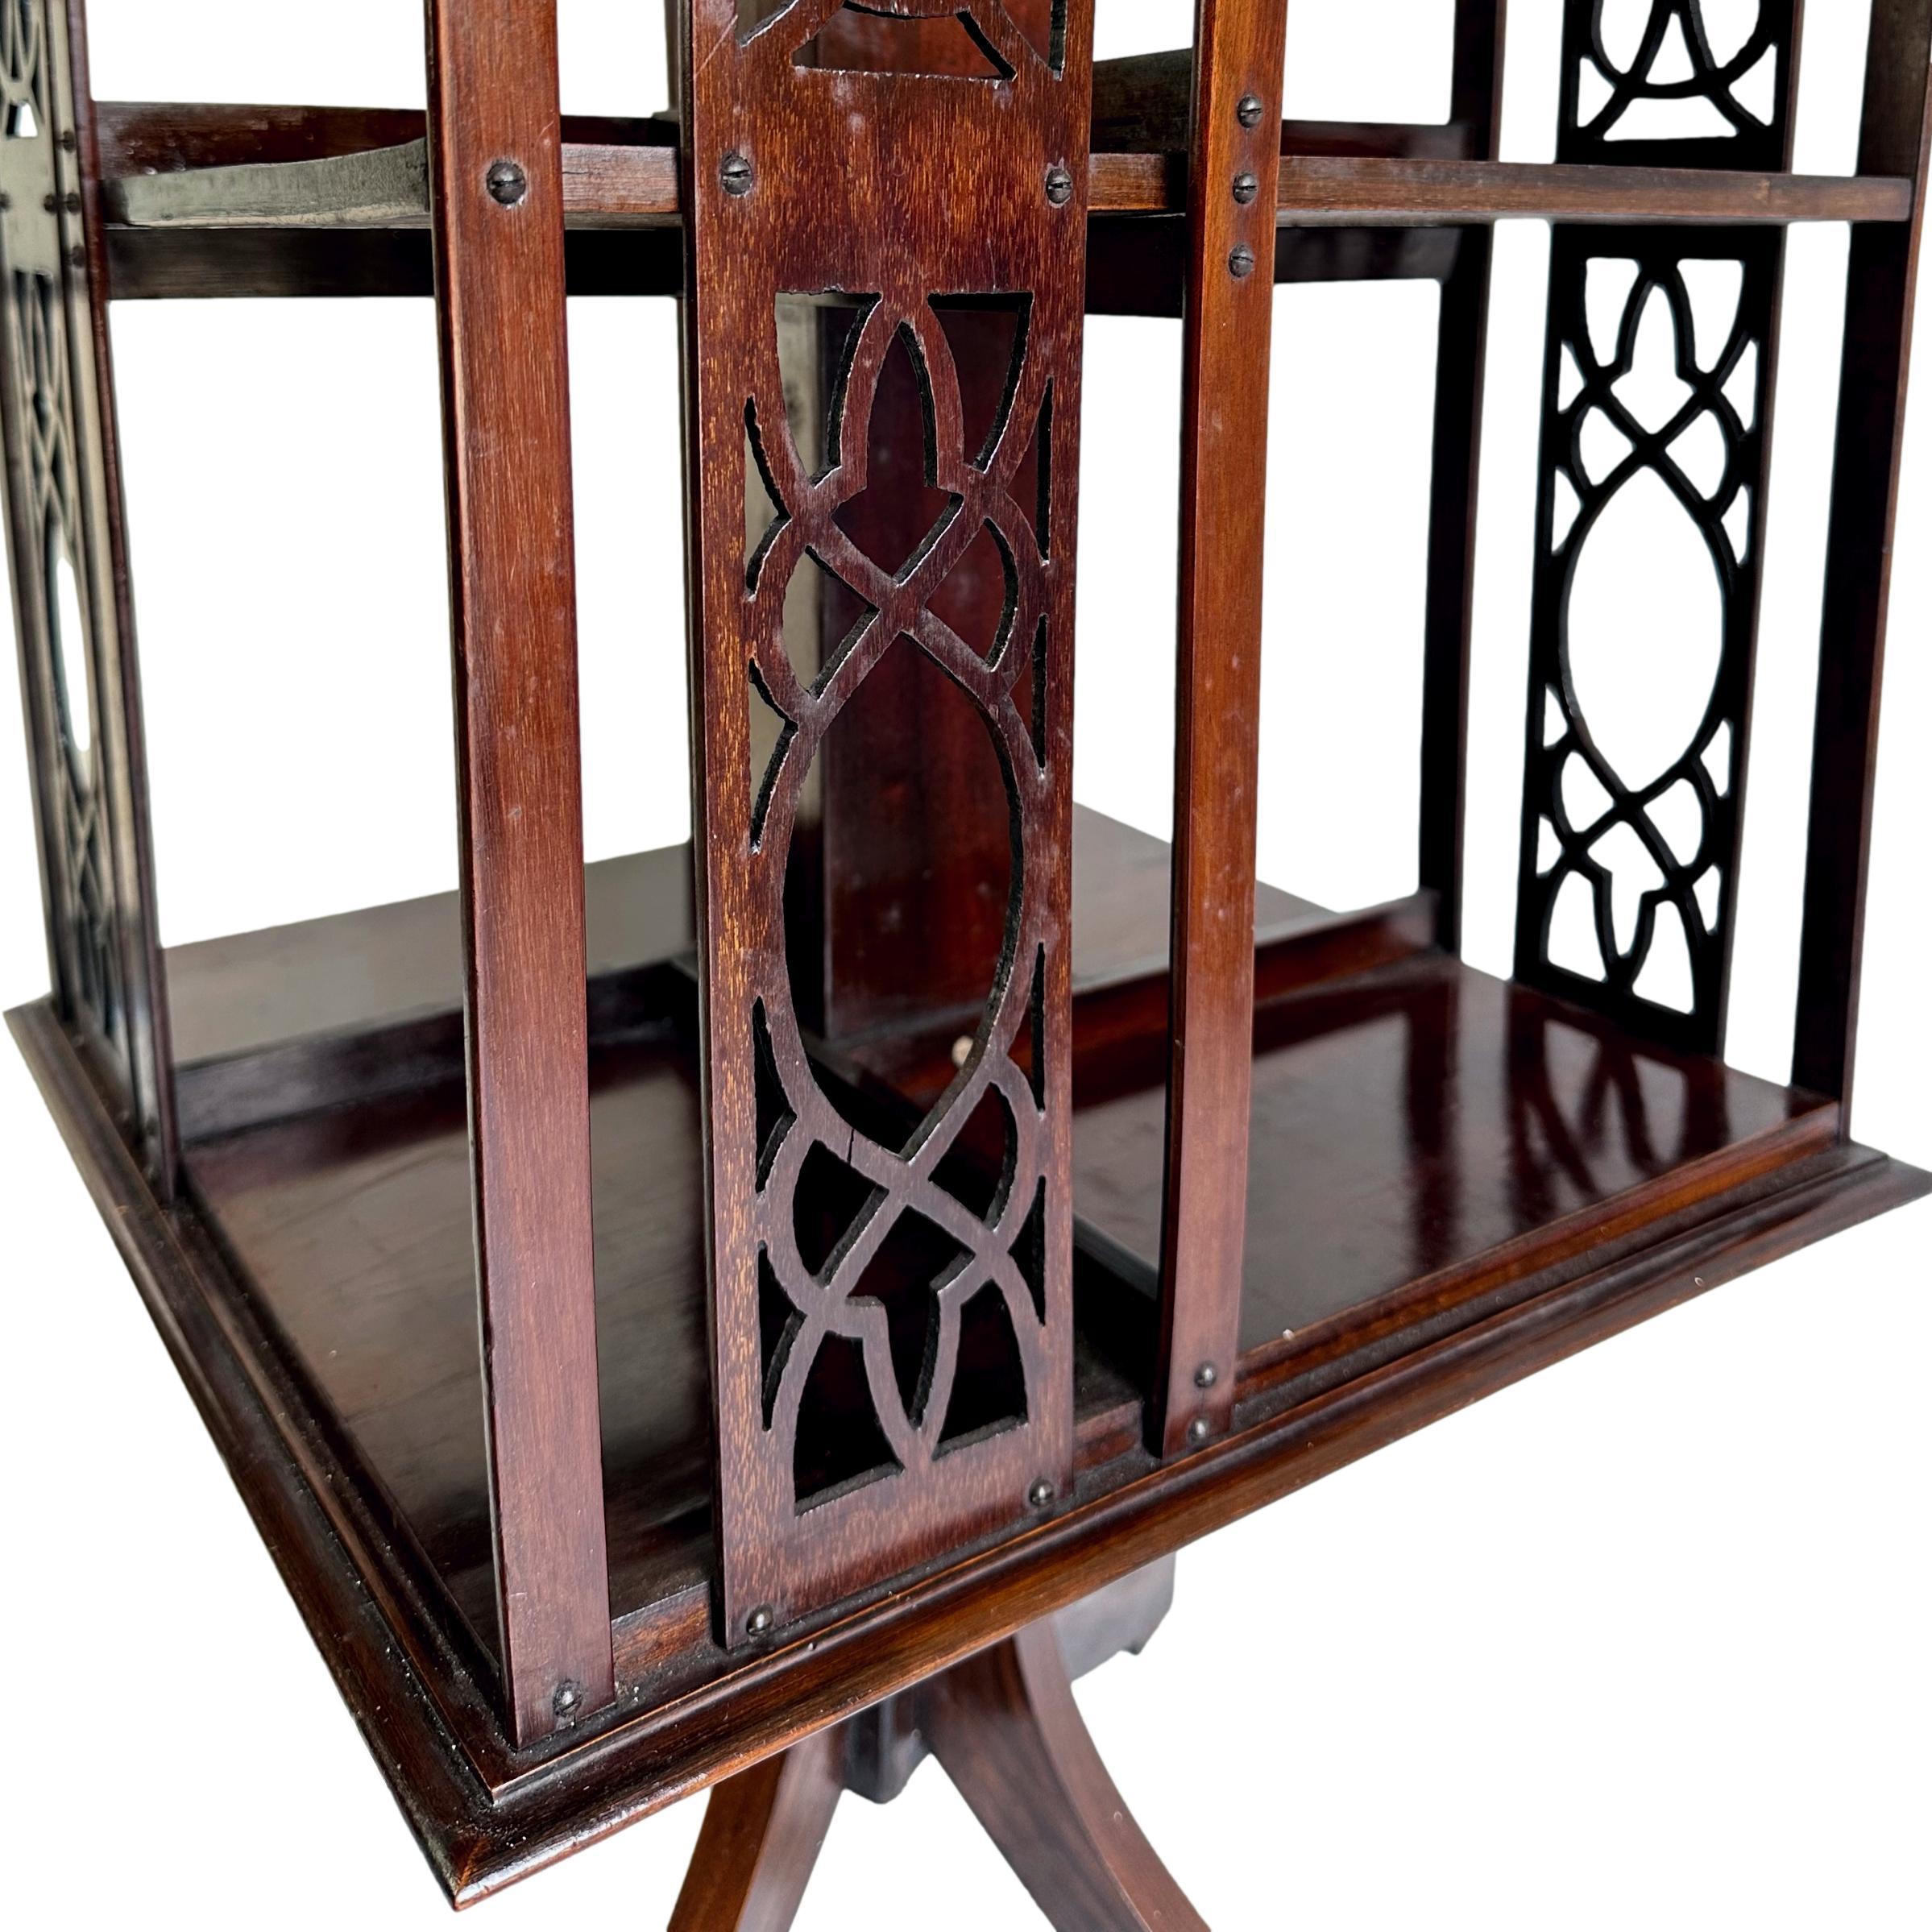 Early 20th Century A Mahogany Revolving Bookcase with Satinwood Inlay, English, ca. 1900 For Sale